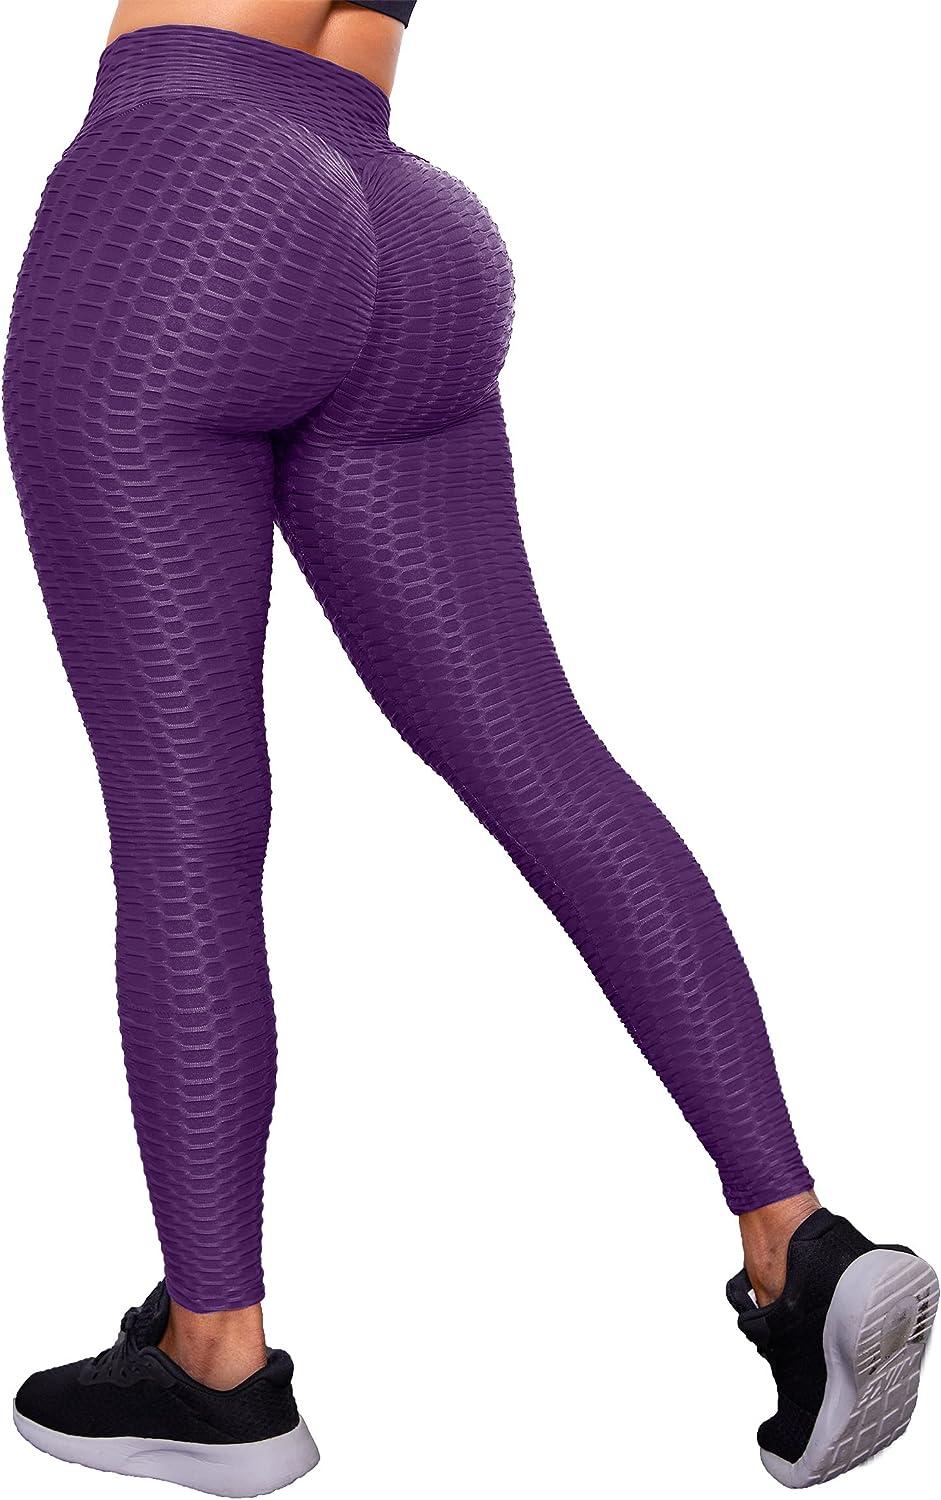  Women Intensify Athletic Shorts Seamless Scrunch Workout  Shorts High Waisted Active Gym Yoga Shorts Purple Dove L